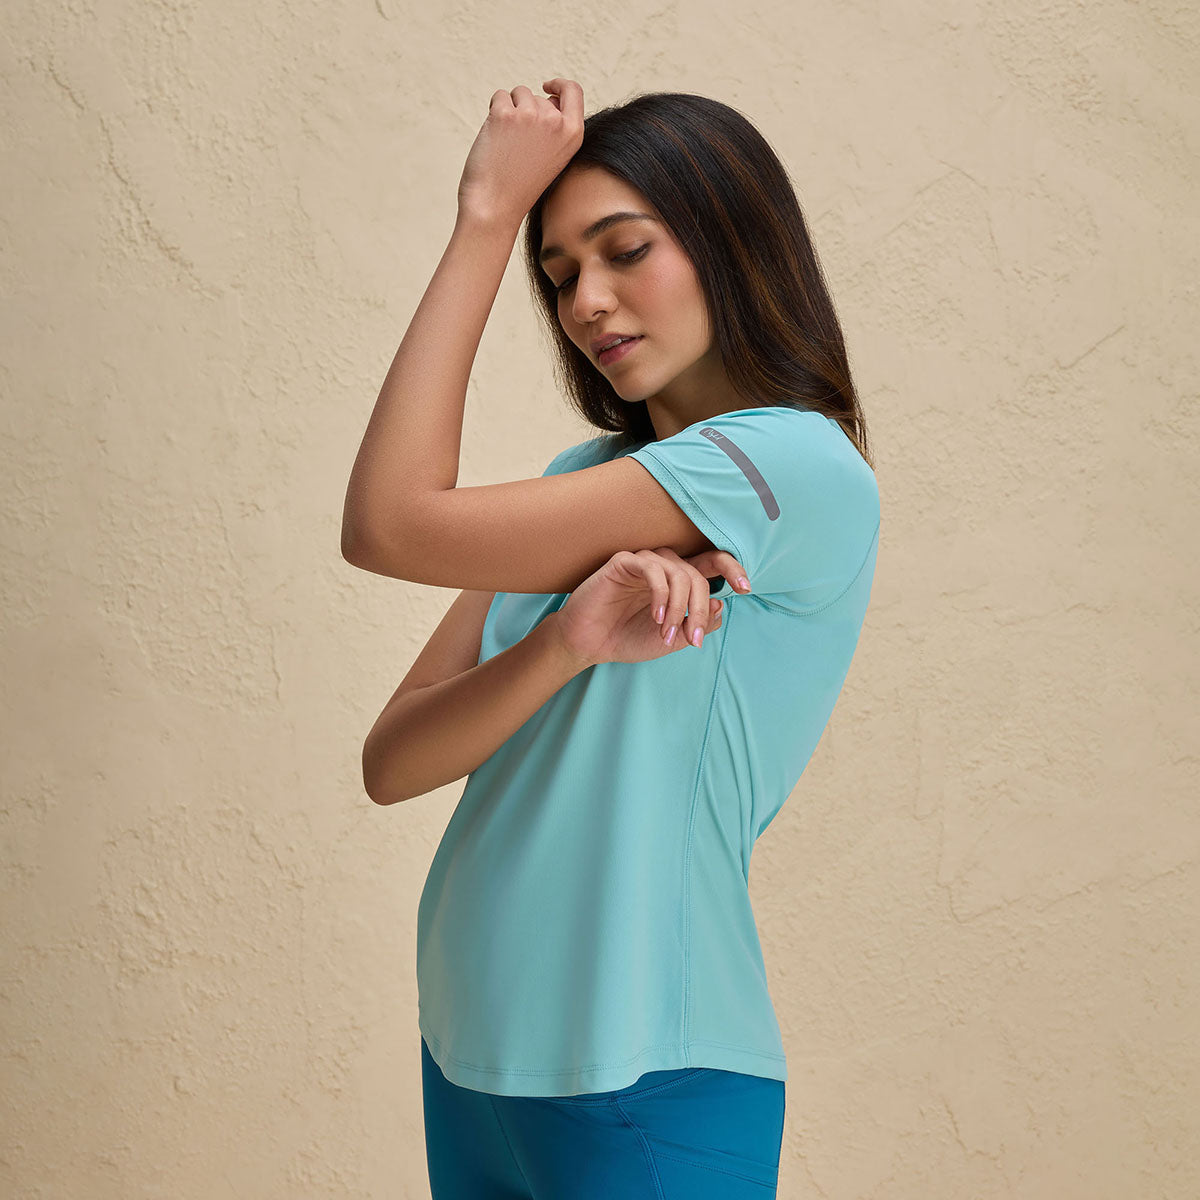 Nykd By Nykaa Half Sleeves Regular Fit Quick Dry Running Fitness Sports Tee-NYK033-Turquoise